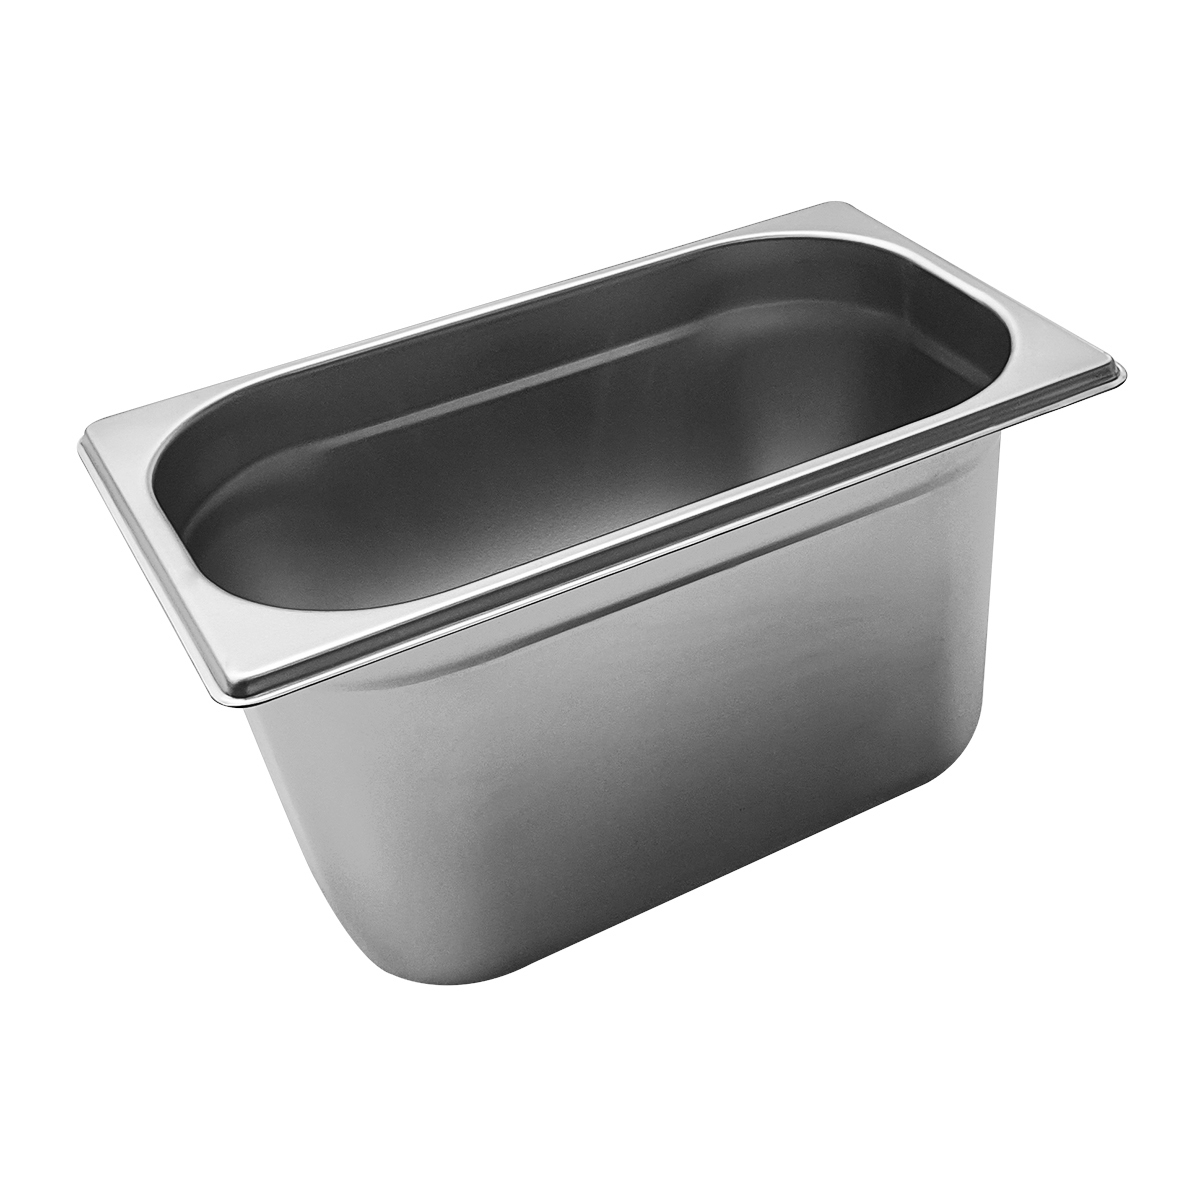 Cater-Cook 1/4 Stainless Steel Gastronorm Container 150mm Deep - CK4026